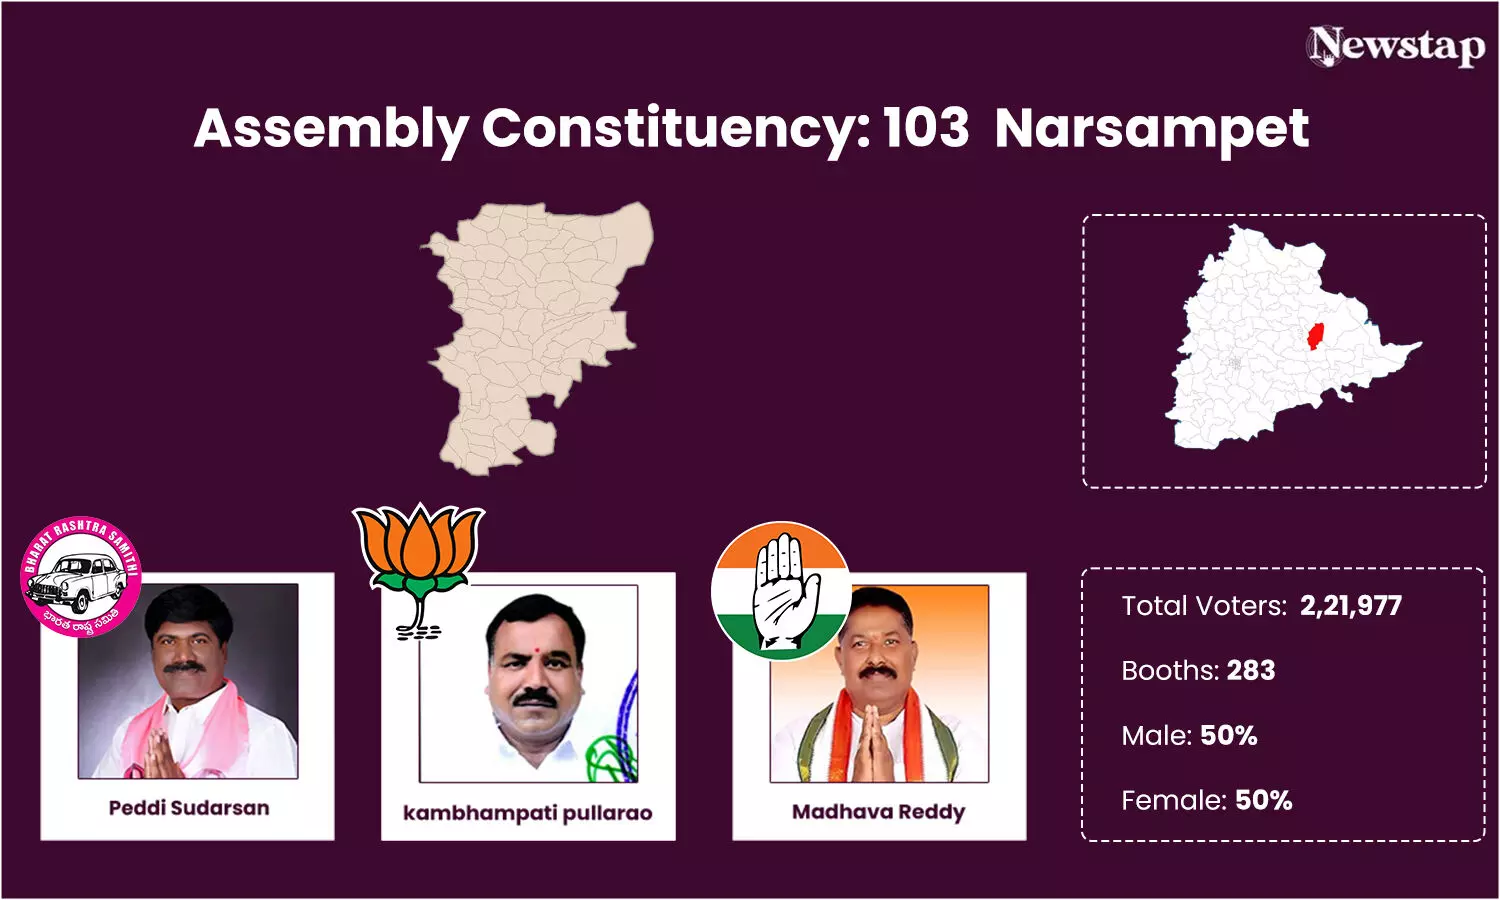 It’s BRS’s development mantra vs Congress candidate’s popularity contest in Narsampet